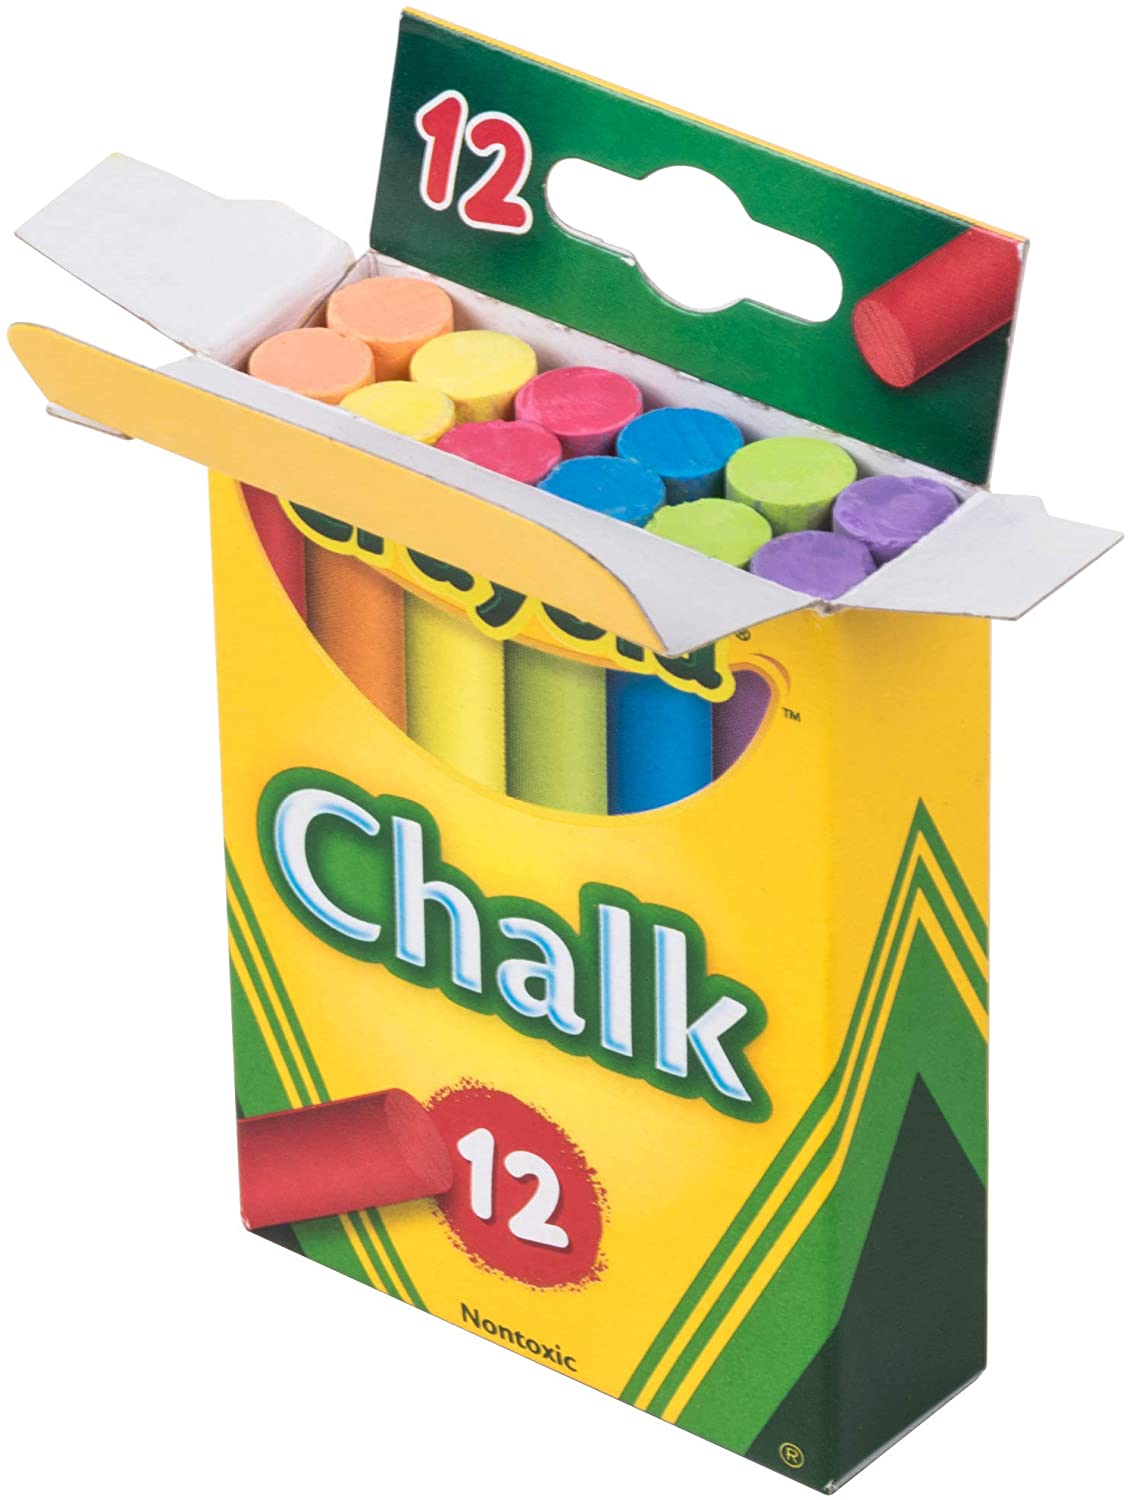 Crayola Chalk, Assorted Colors 24-Count Draws Write Smooth Clean lines Non-Toxic - Pack of 2